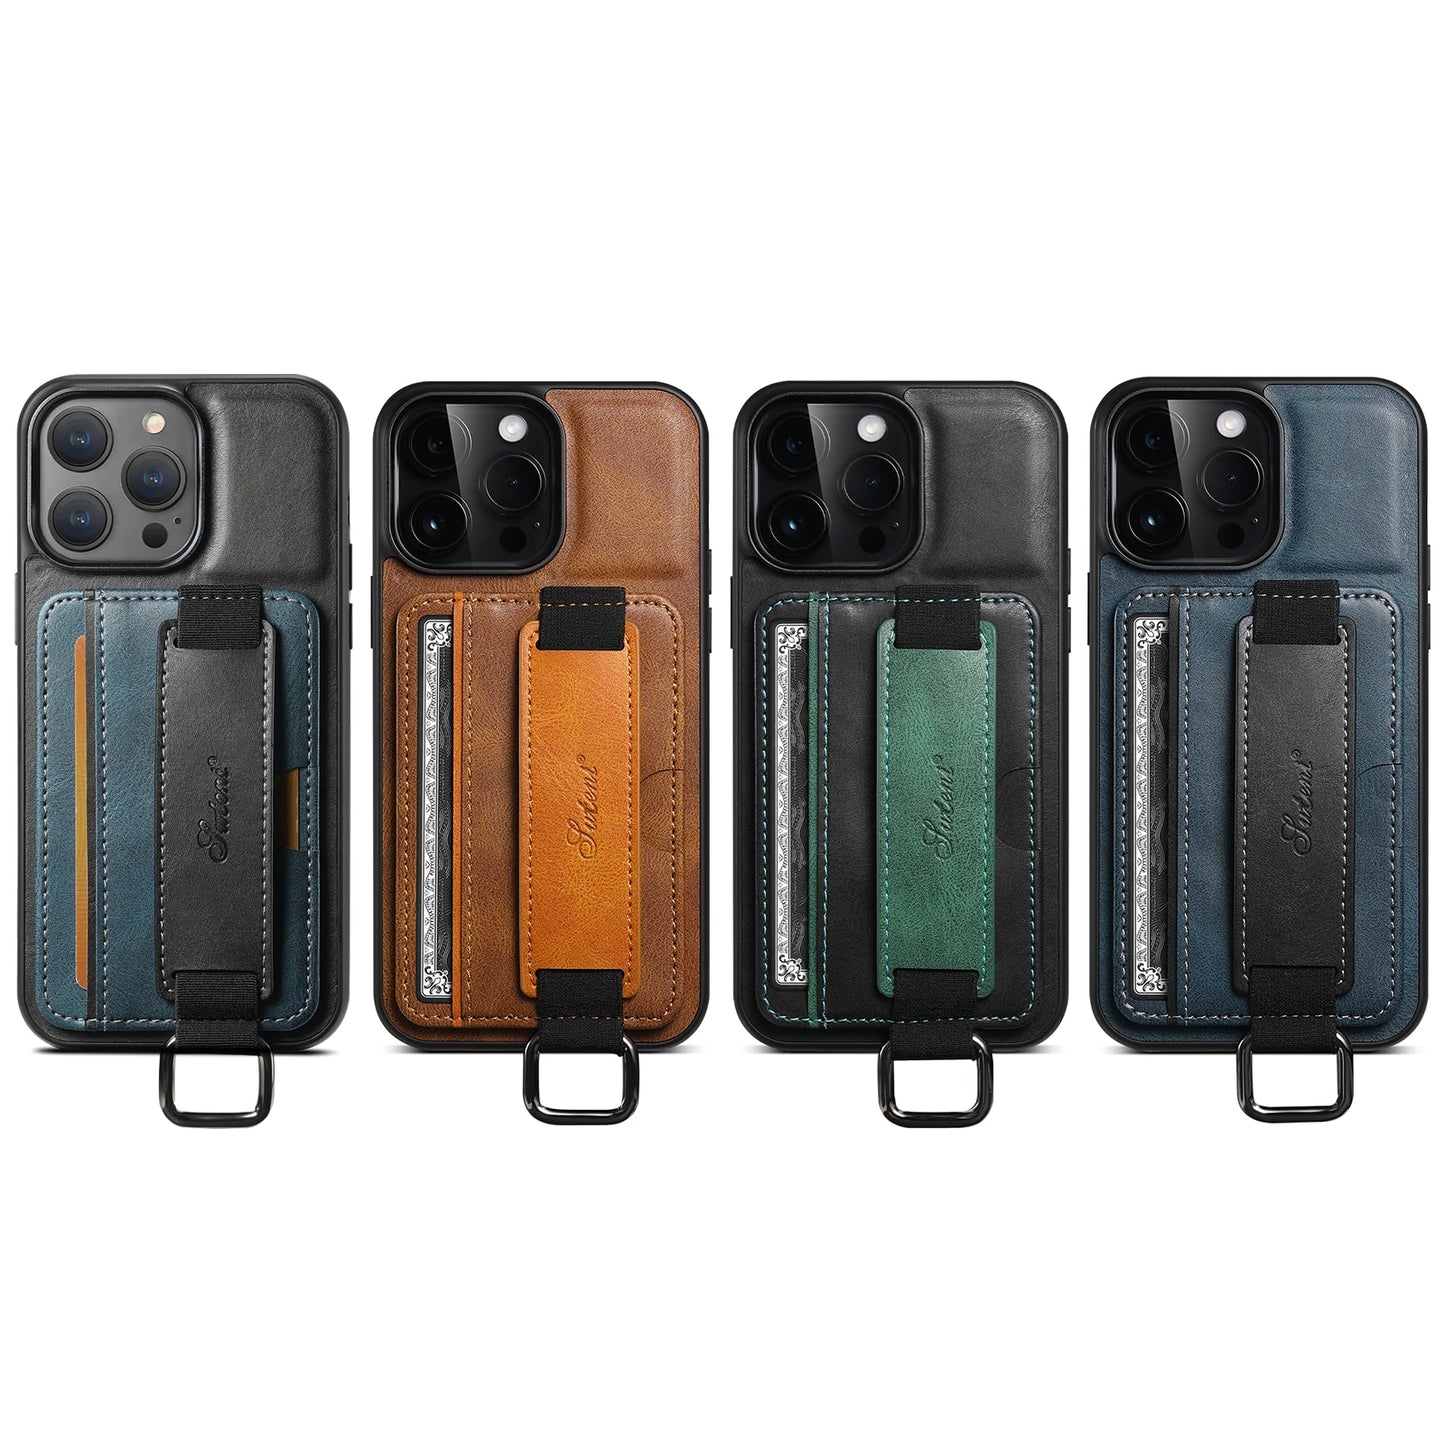 Wrist strap Leather Wallet Phone Case For iPhone